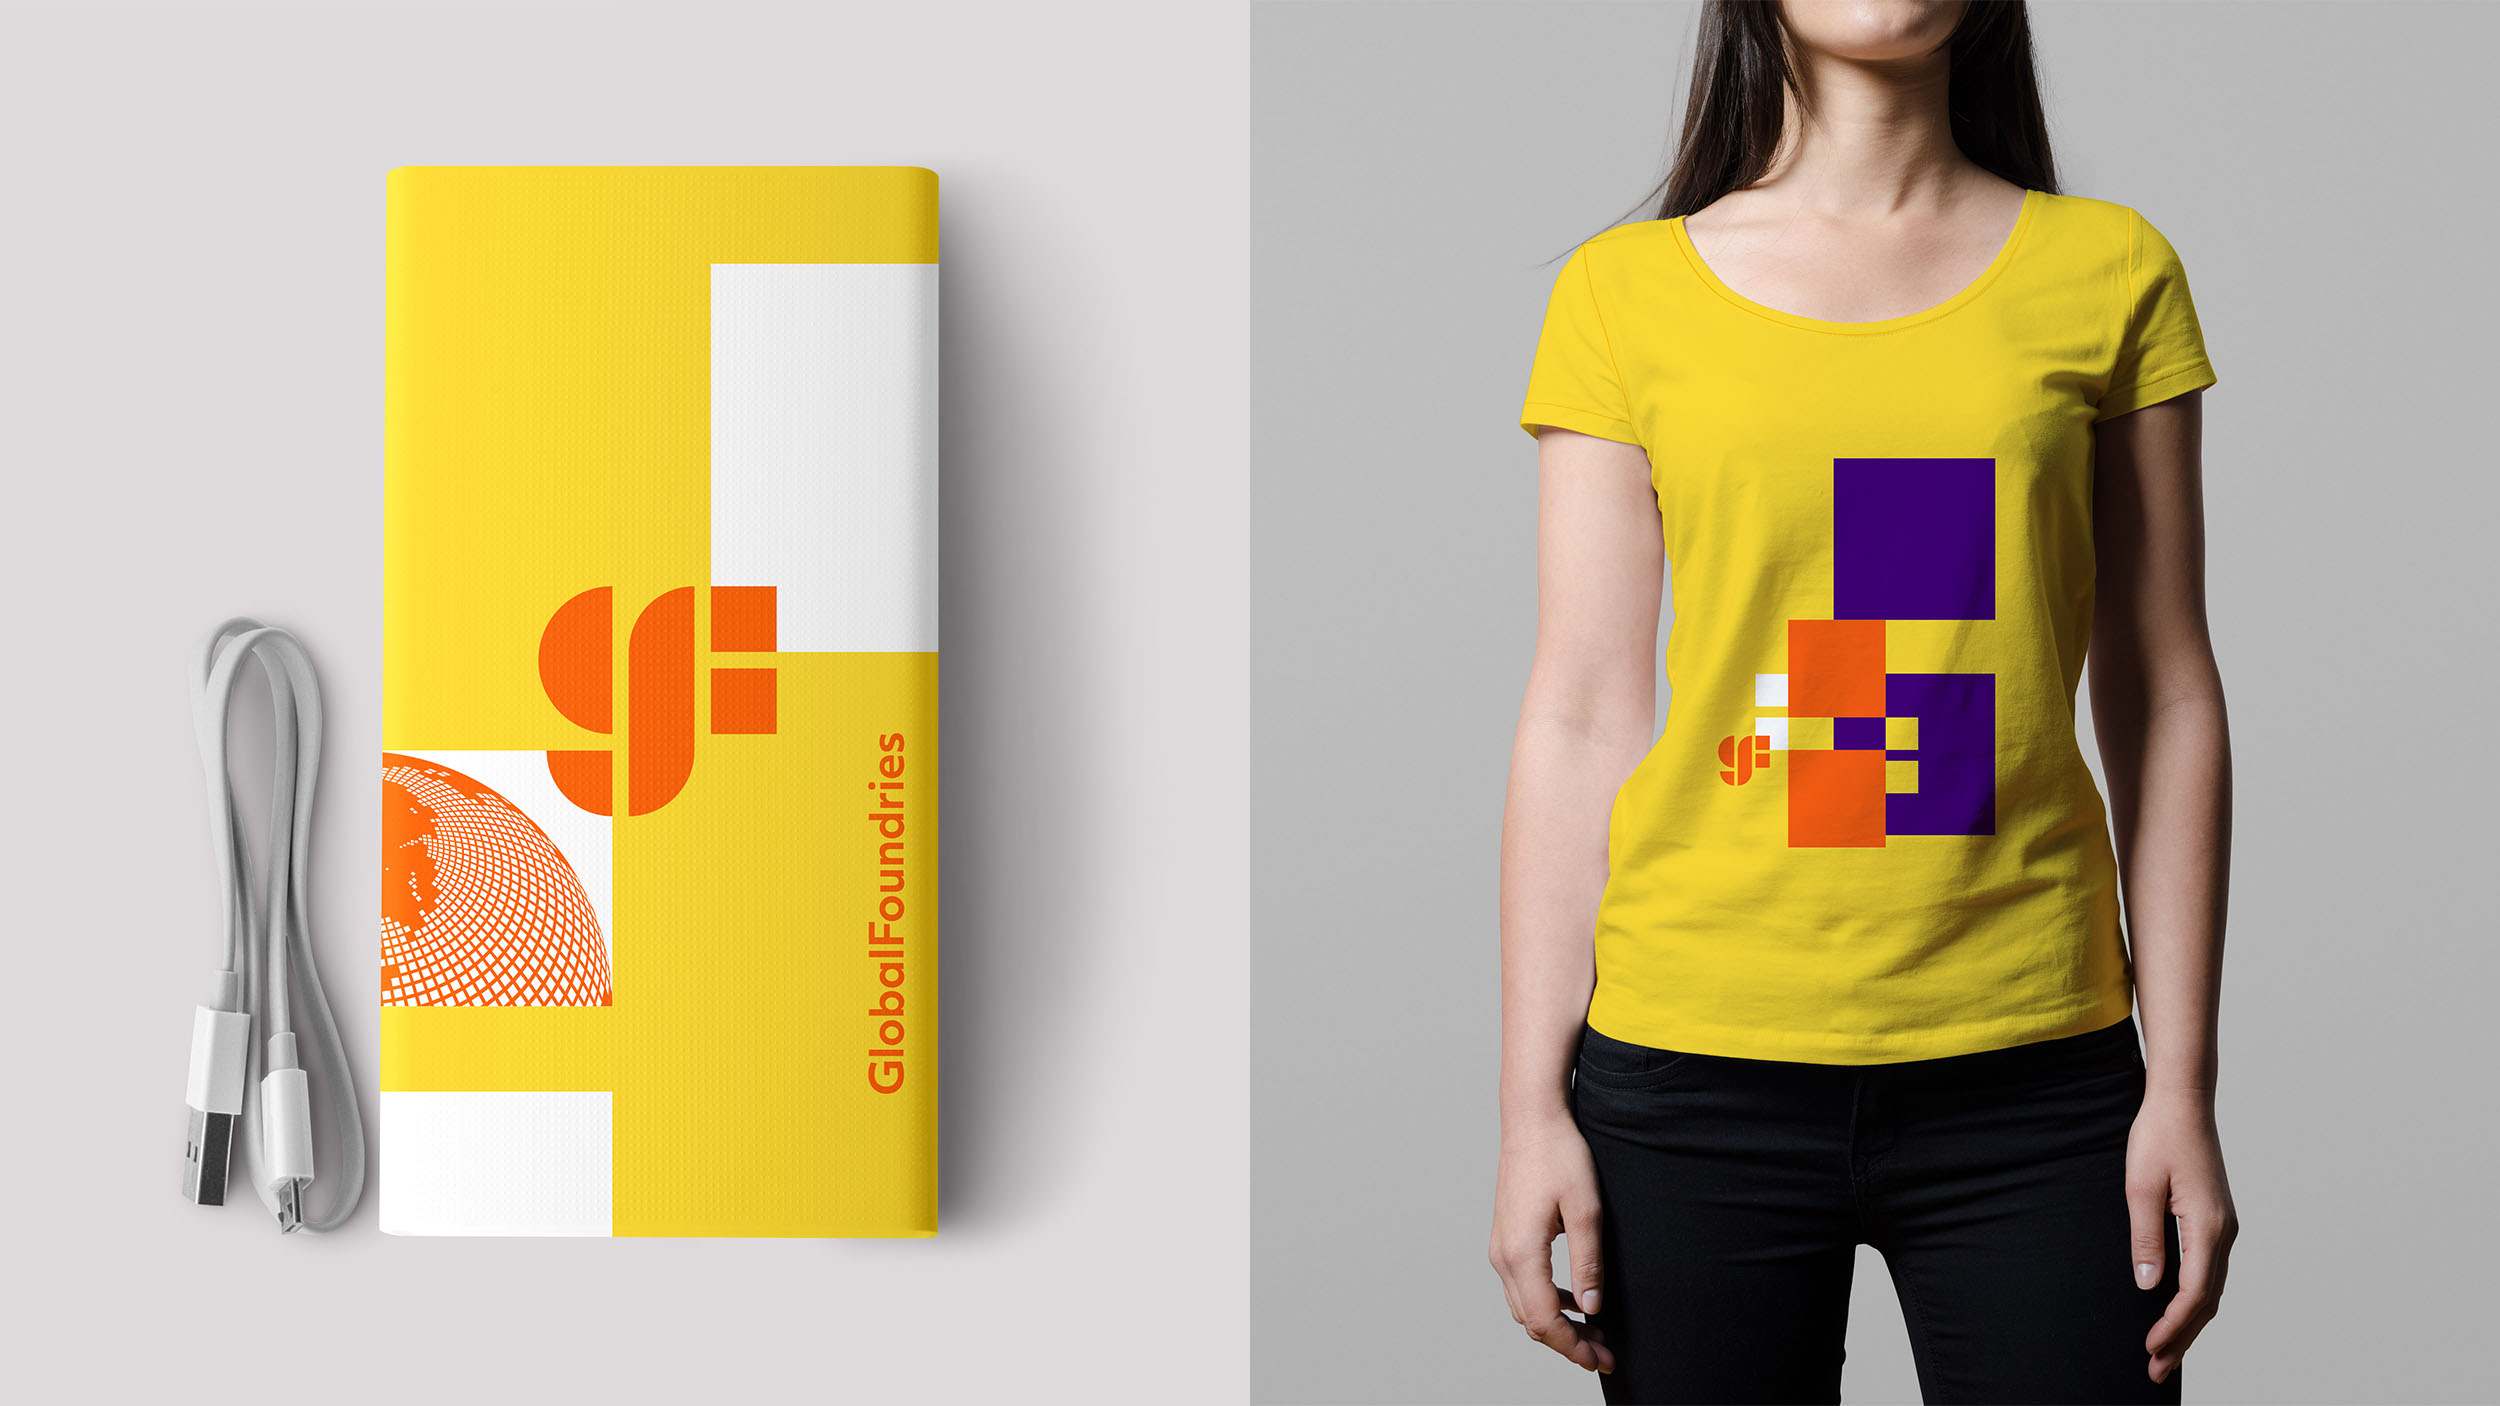 Global Foundries new visual identity featured on a yellow power bank and t-shirt